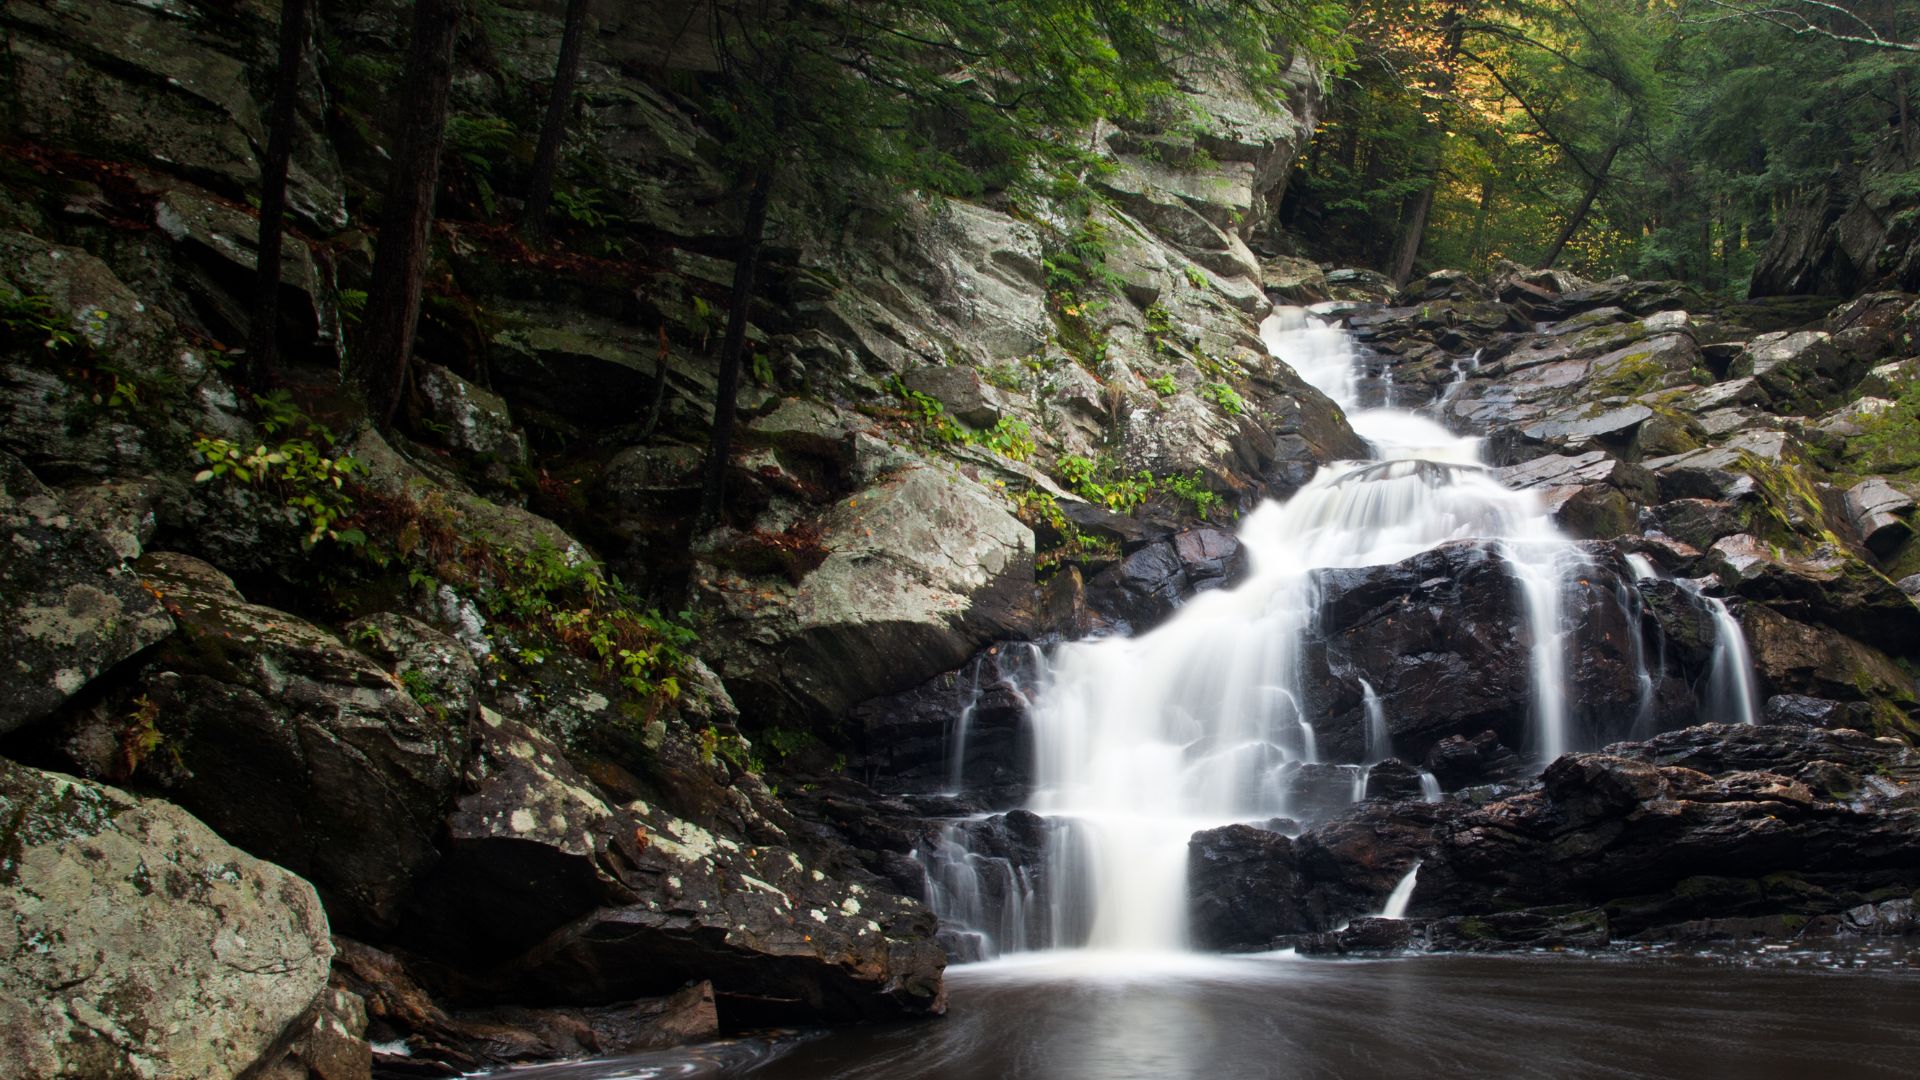 Waconah Falls, located in the Berkshires